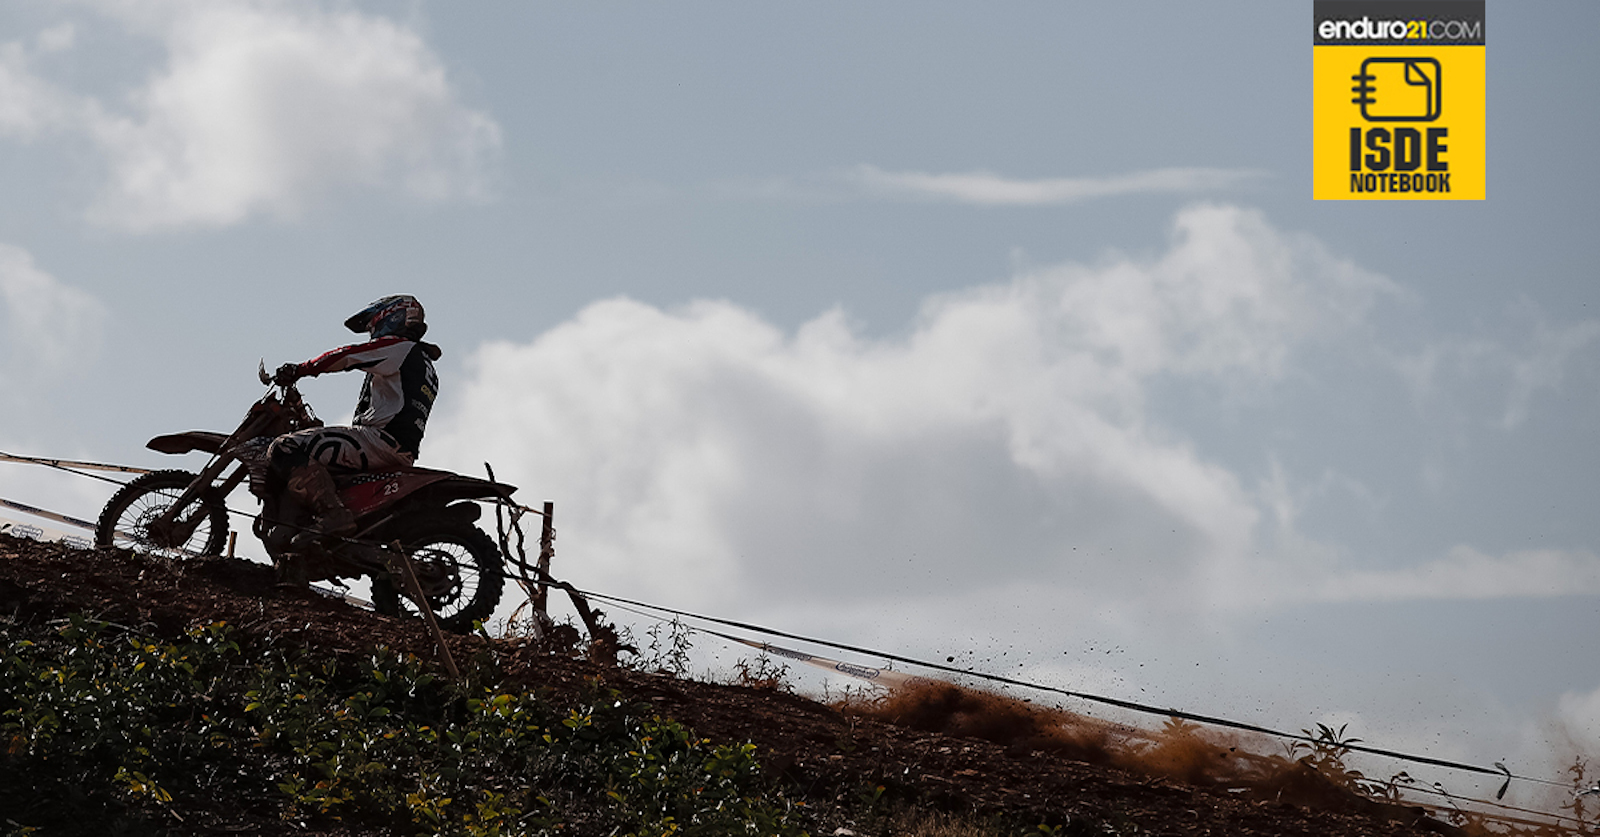 ISDE 2019 Day 5 Notebook direct from Portugal – blown fork seals, battered bodies and Trophies